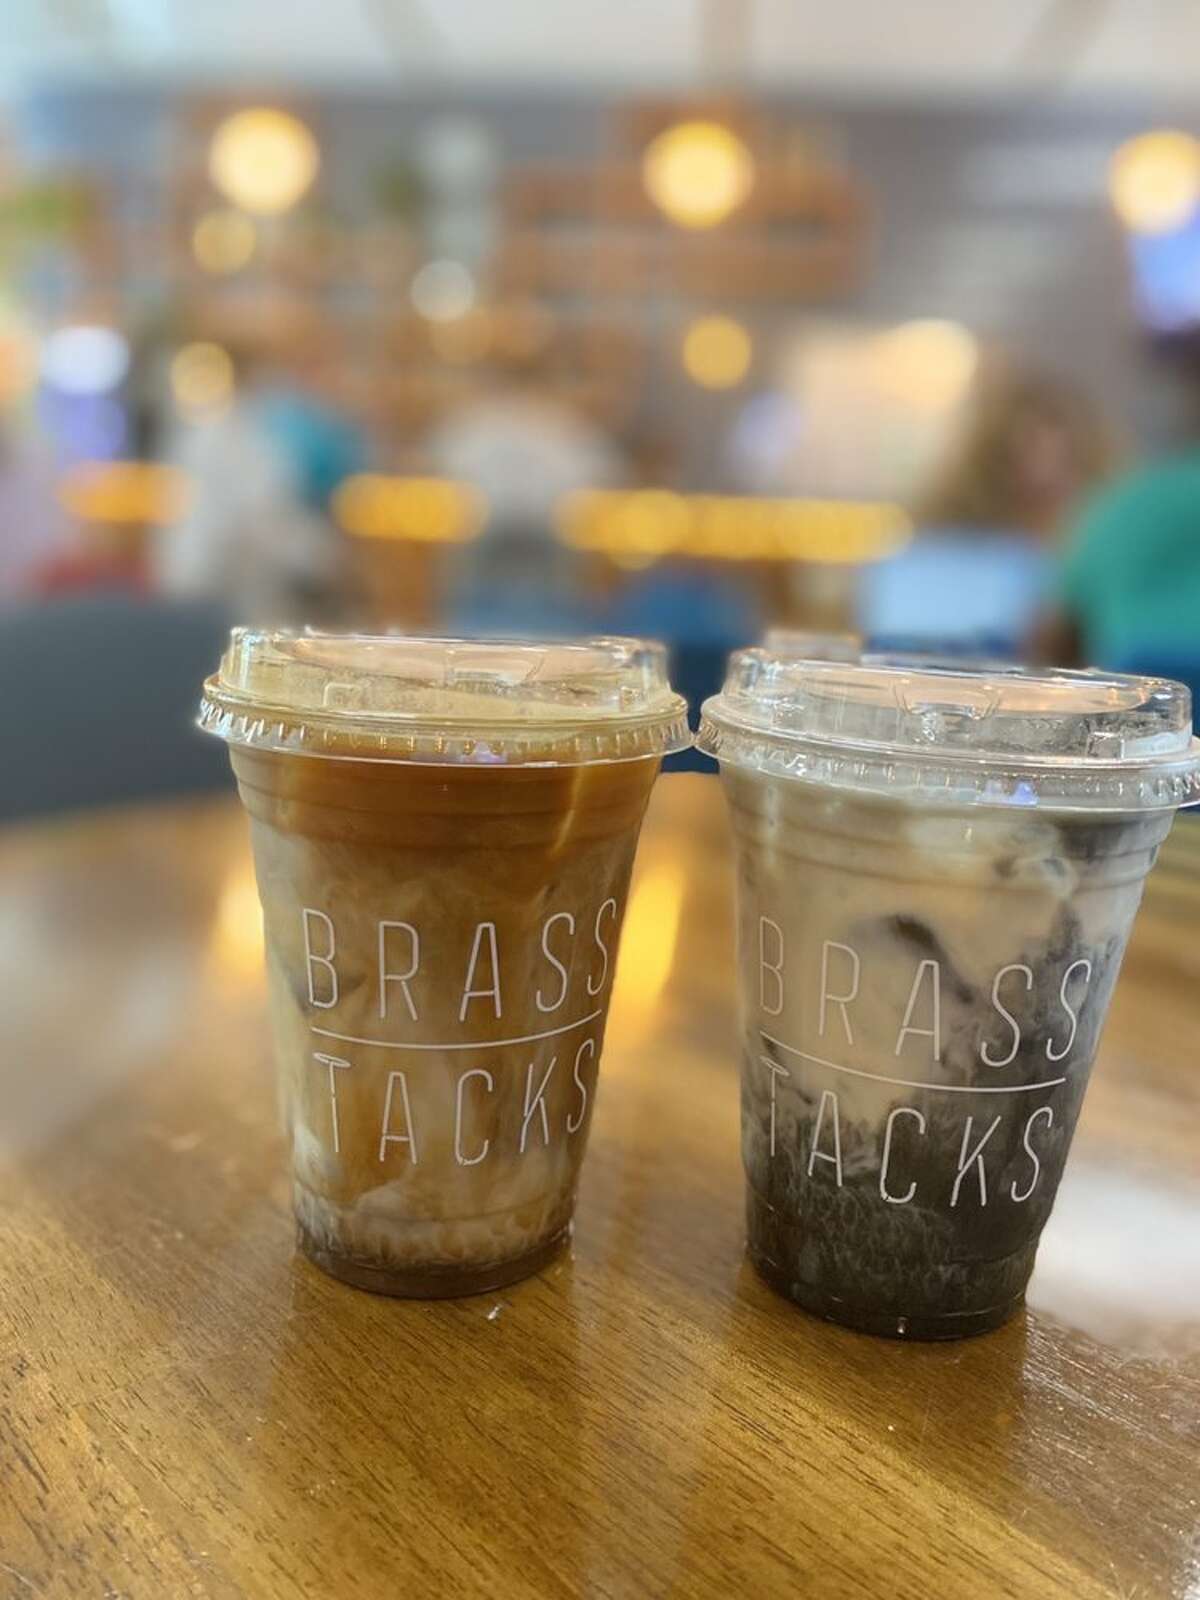 Lavender iced latte and charcoal iced latte at Brass Tacks.